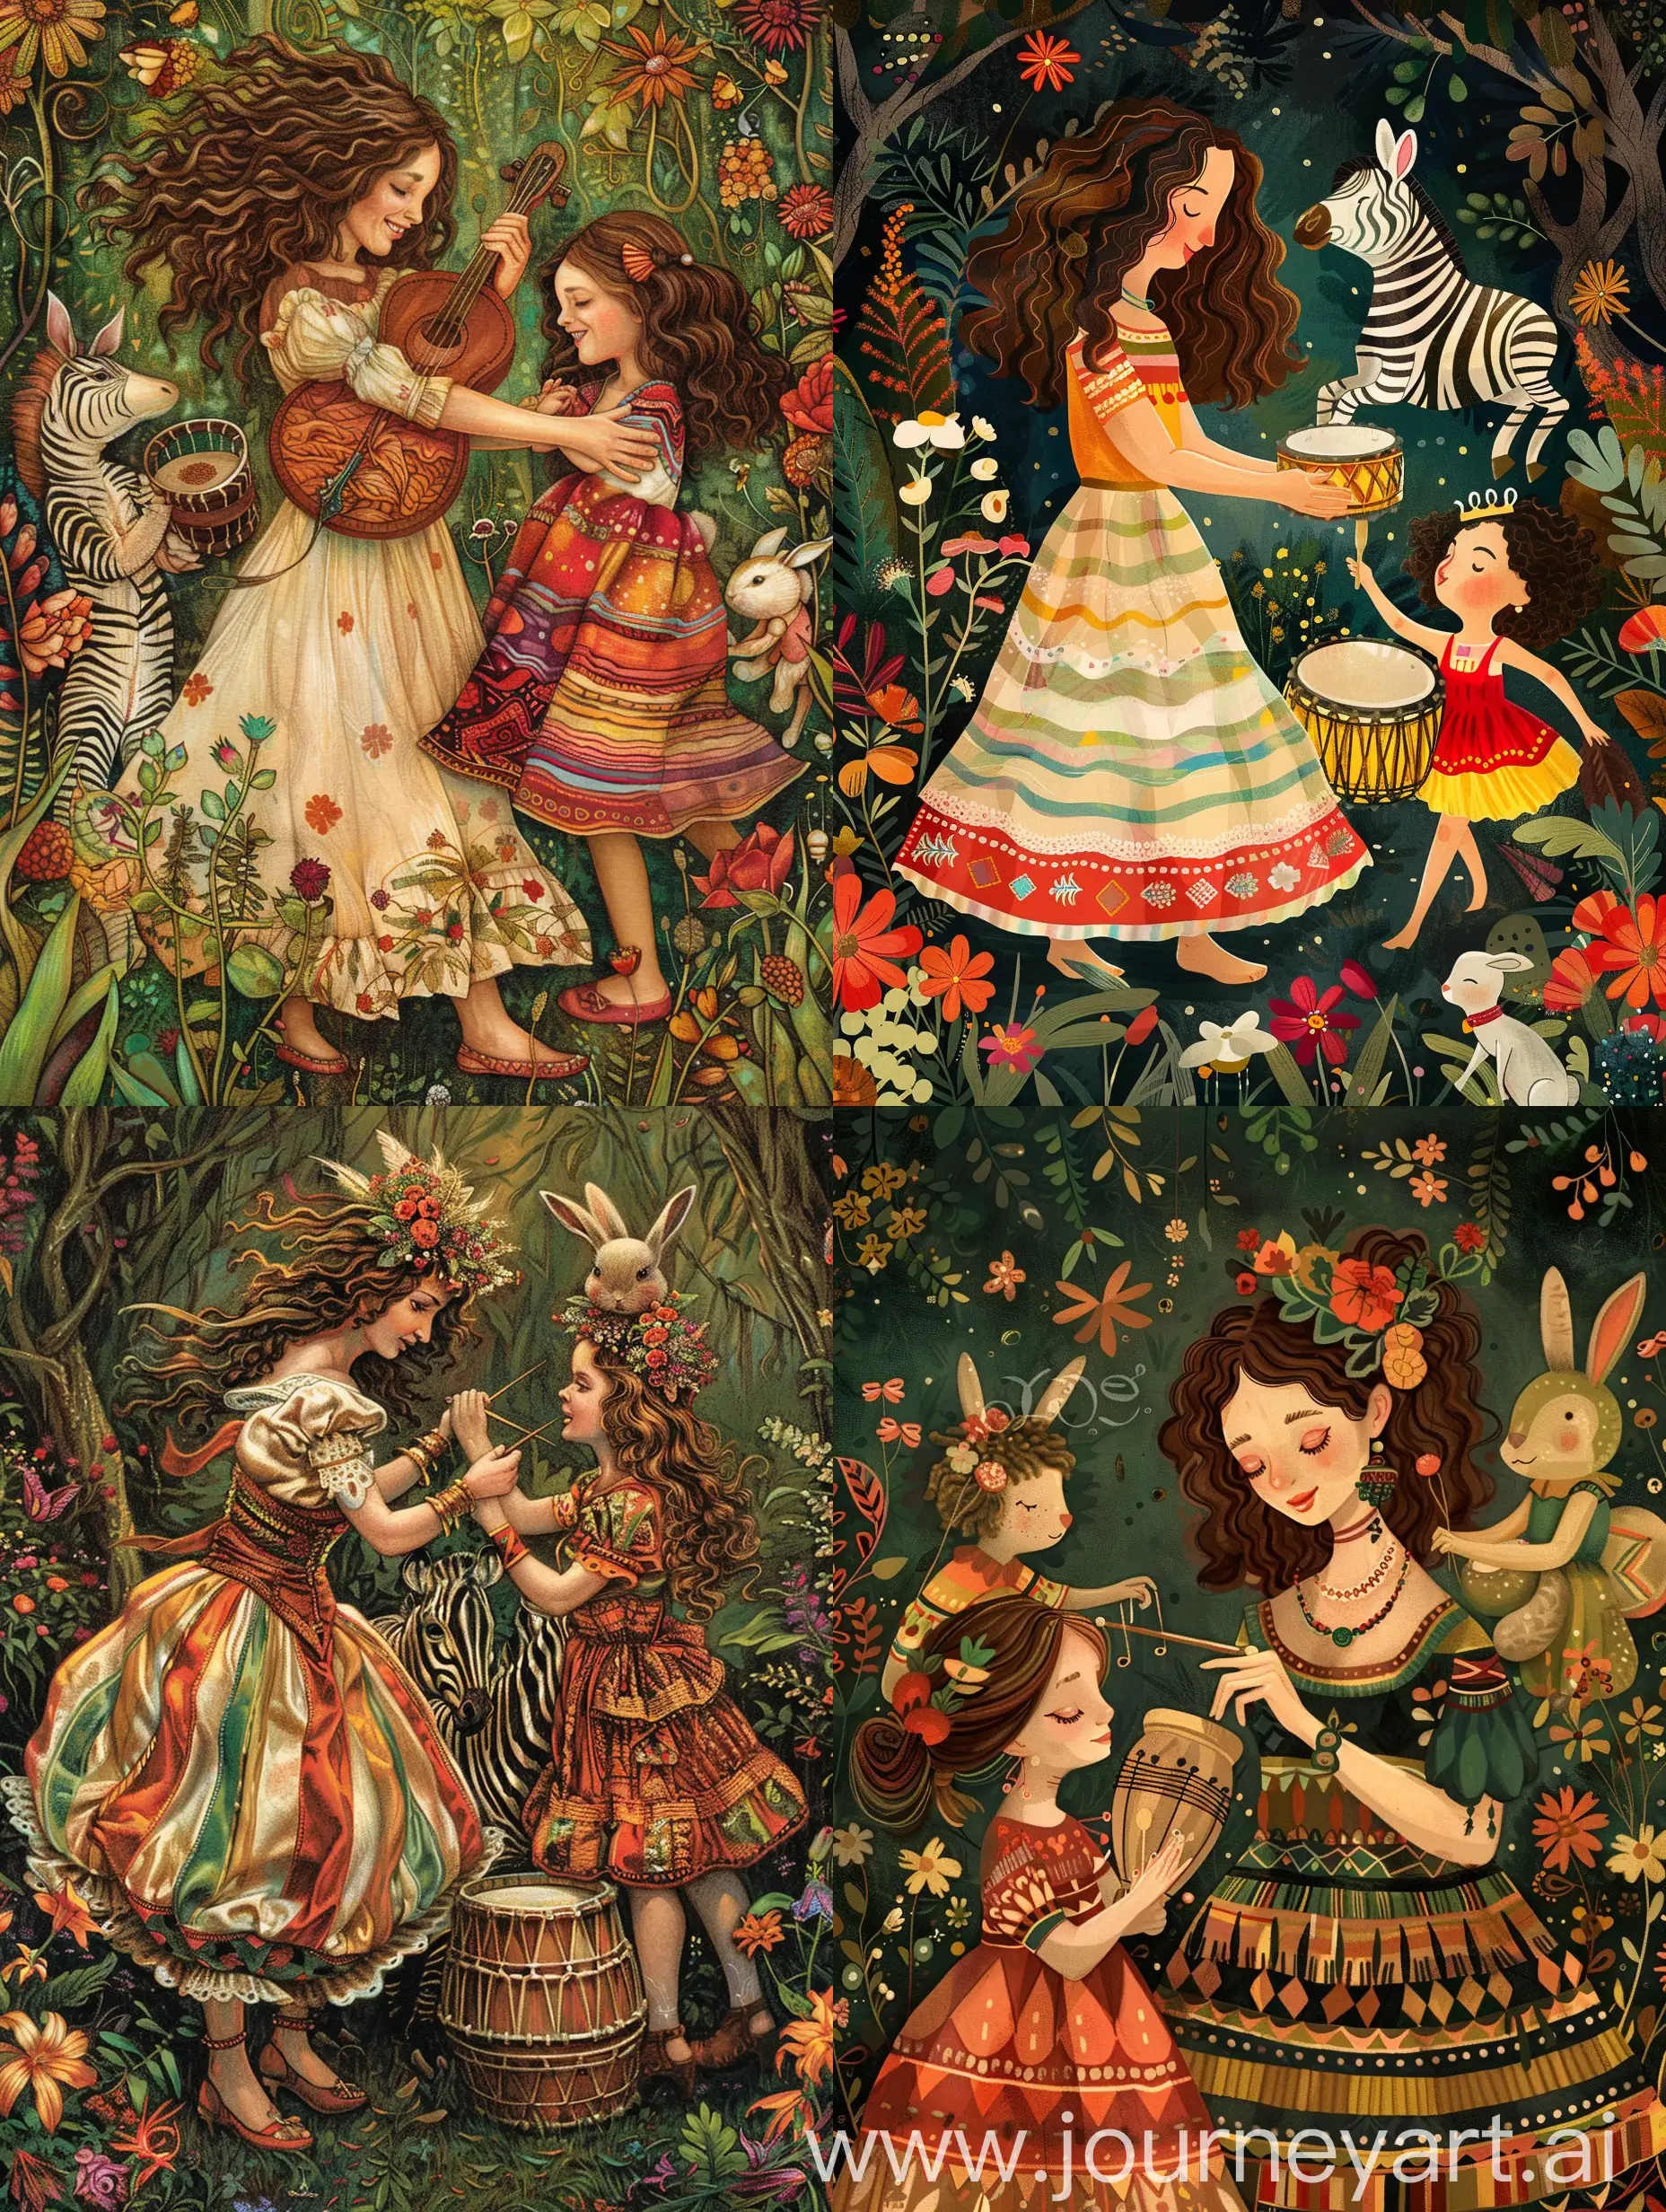 A beautiful, plump woman with curly brown hair and her daughter in red, green, and yellow dance around a zebra, drumini, and bunny characters who play drums in an illustration style reminiscent of children's book illustrations, with flowers. 